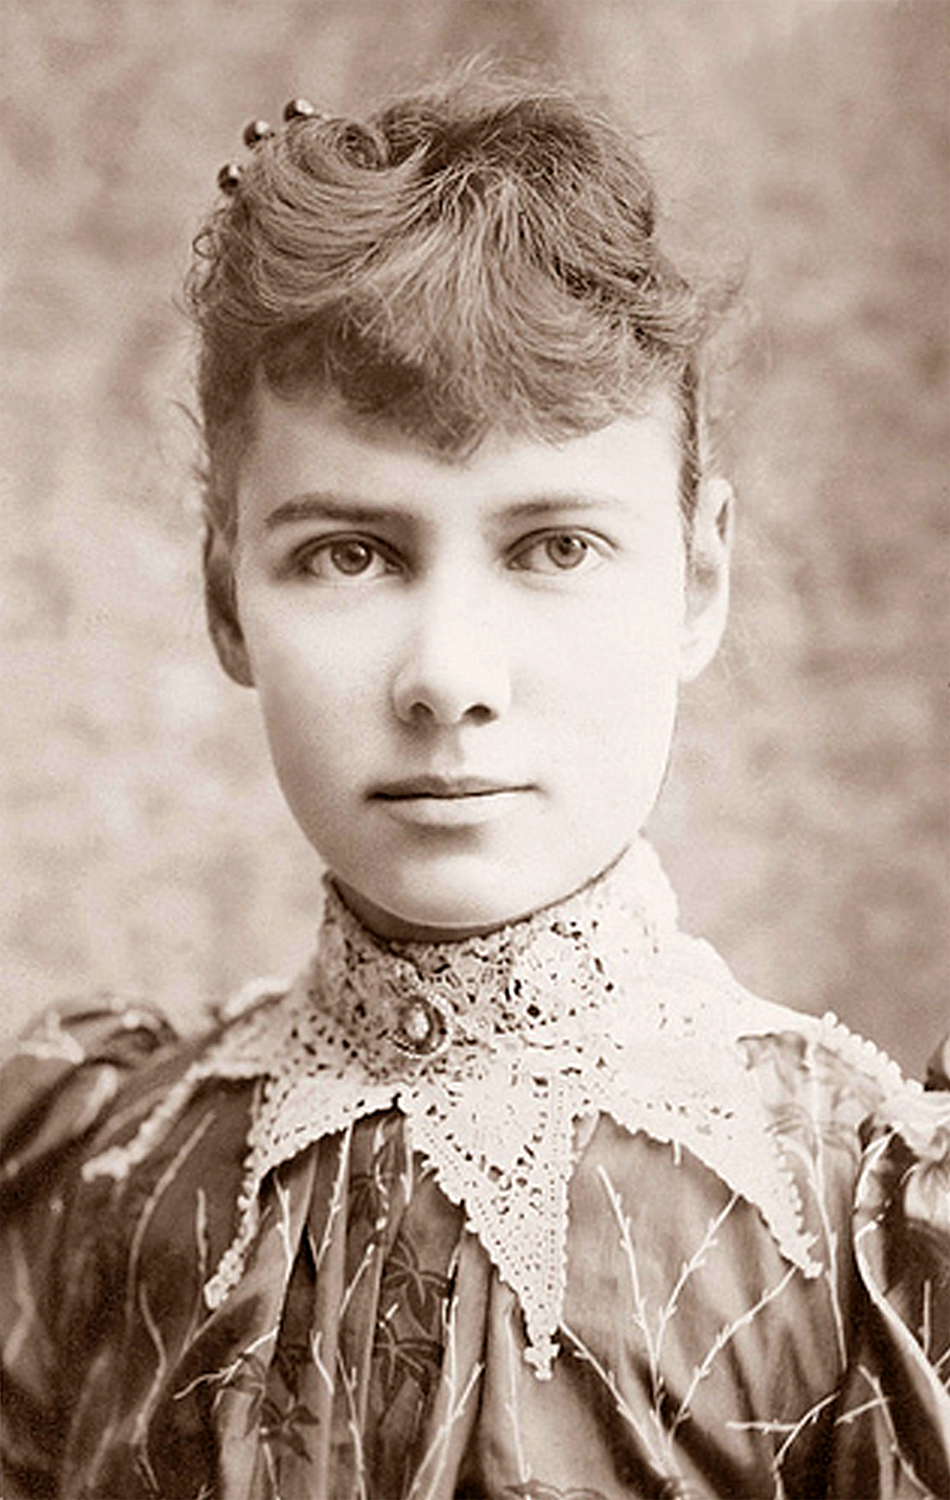 Awesome Women in History: Nellie Bly